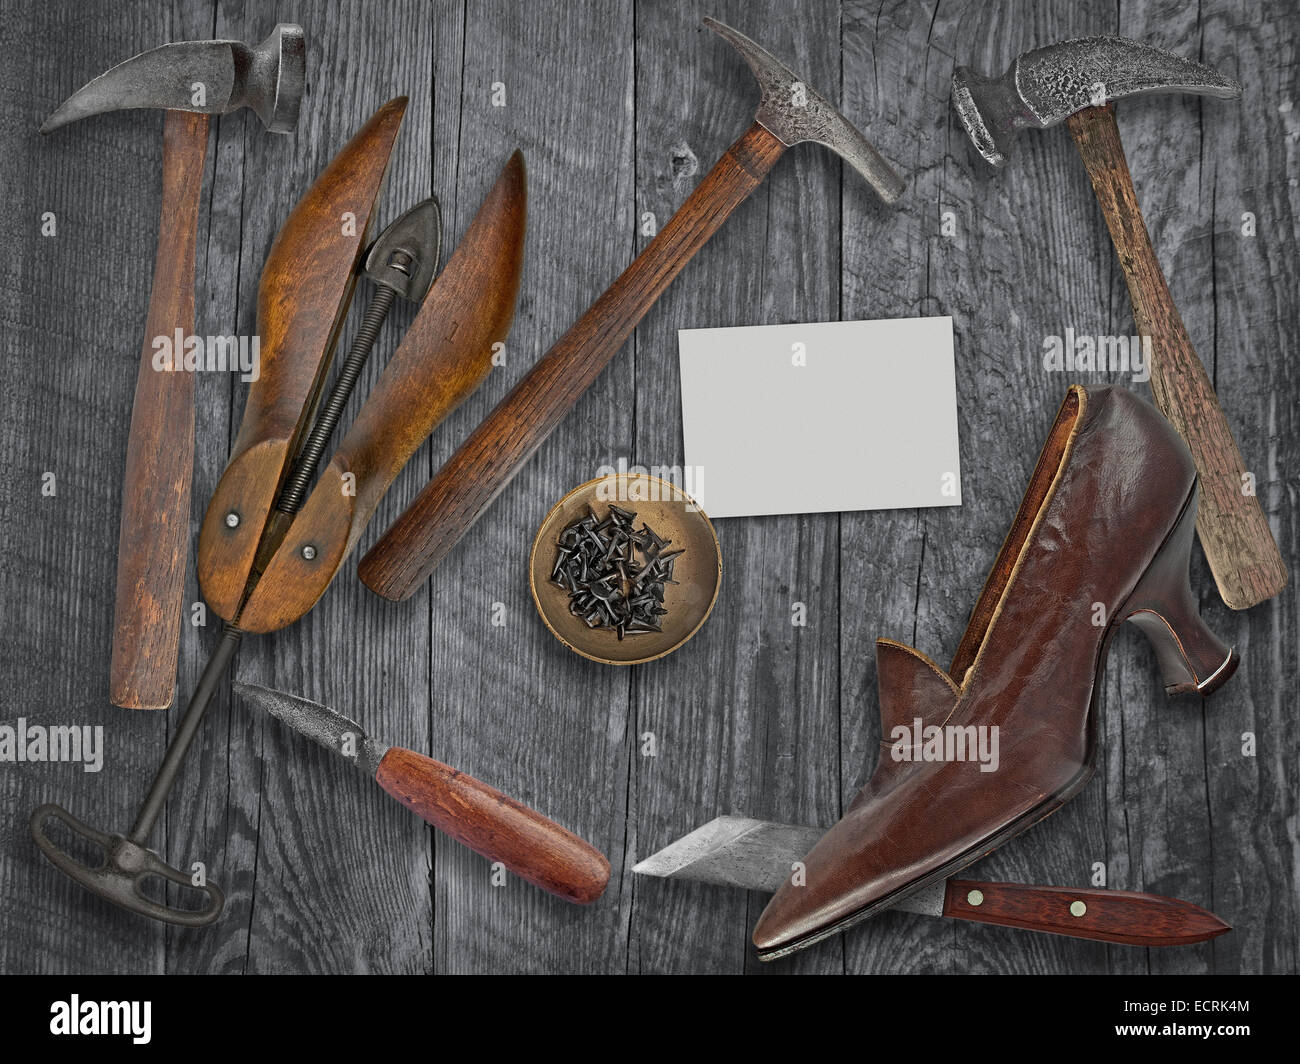 vintage ladies shoe and shoemakers tools over wooden table, space for your text on a blank business card Stock Photo